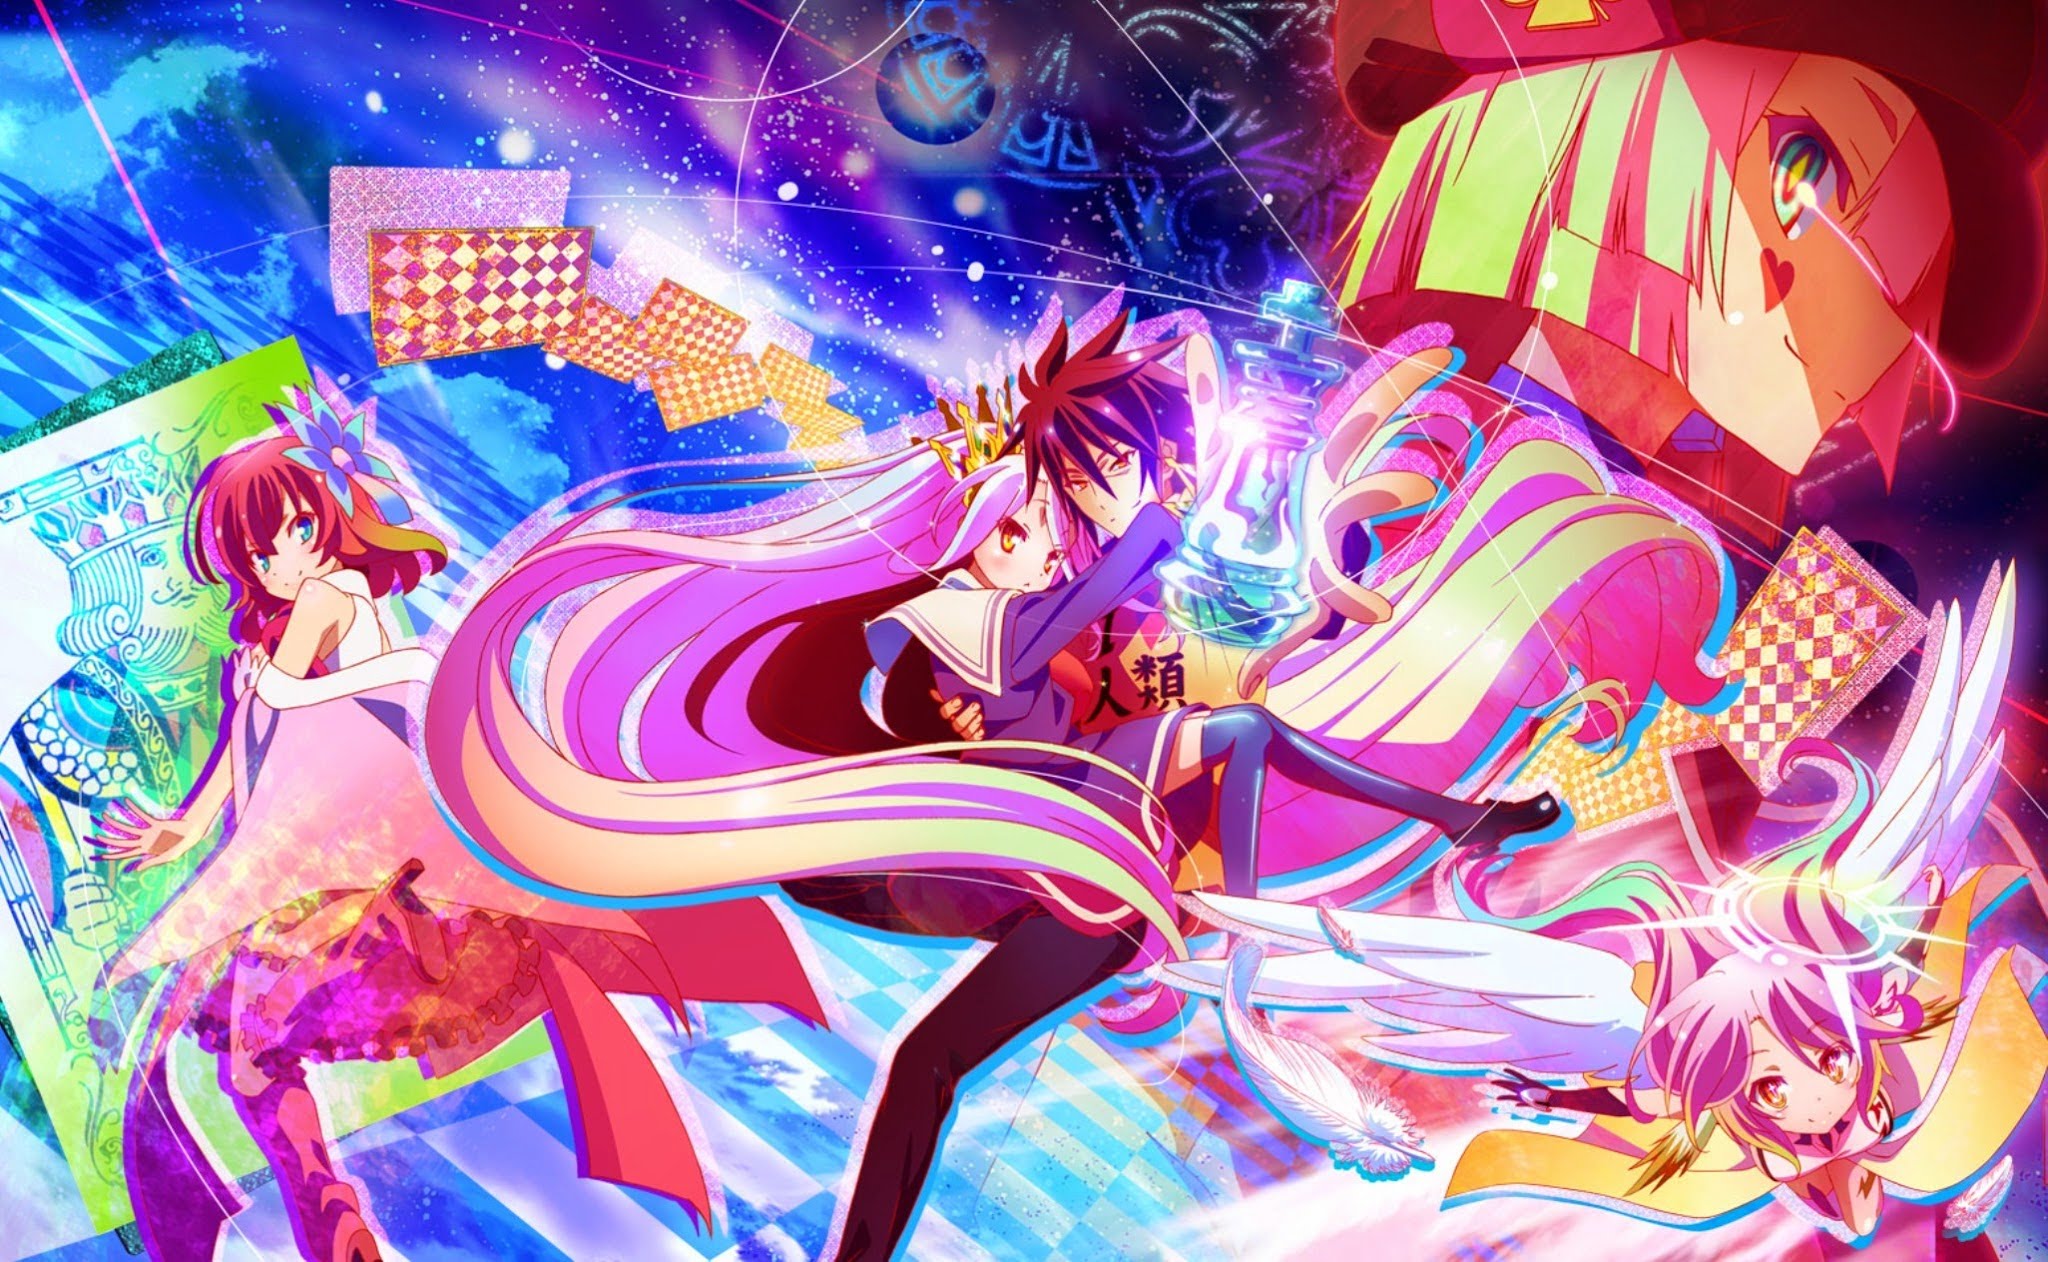 She plays this game. No game no Life.